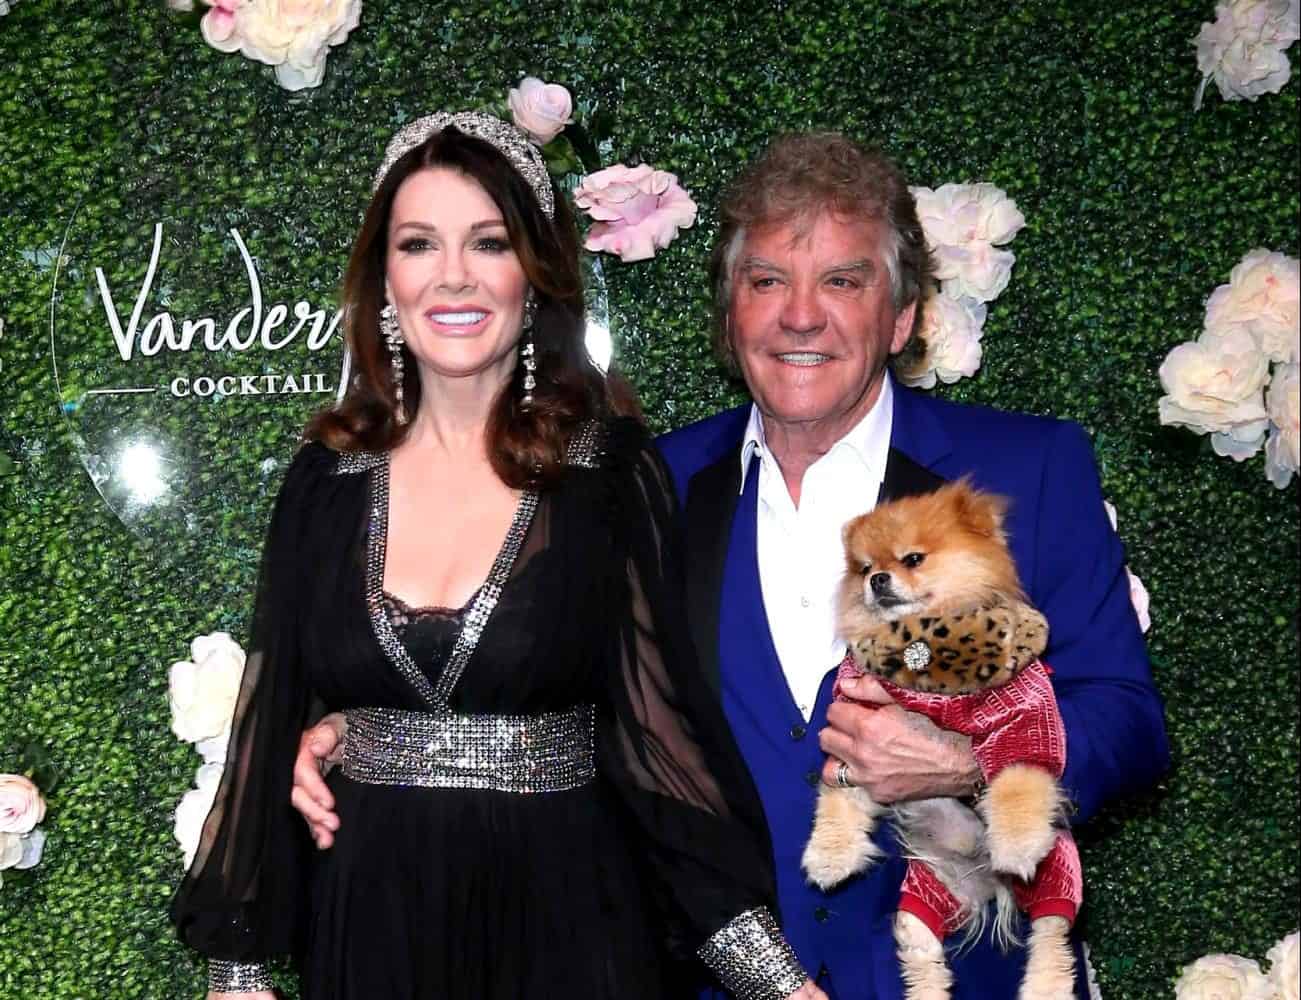 Lisa Vanderpump Reveals the One RHOBH Co-Star She Still Speaks to and Shares the Secret to Her 37-Year Marriage With Ken Todd